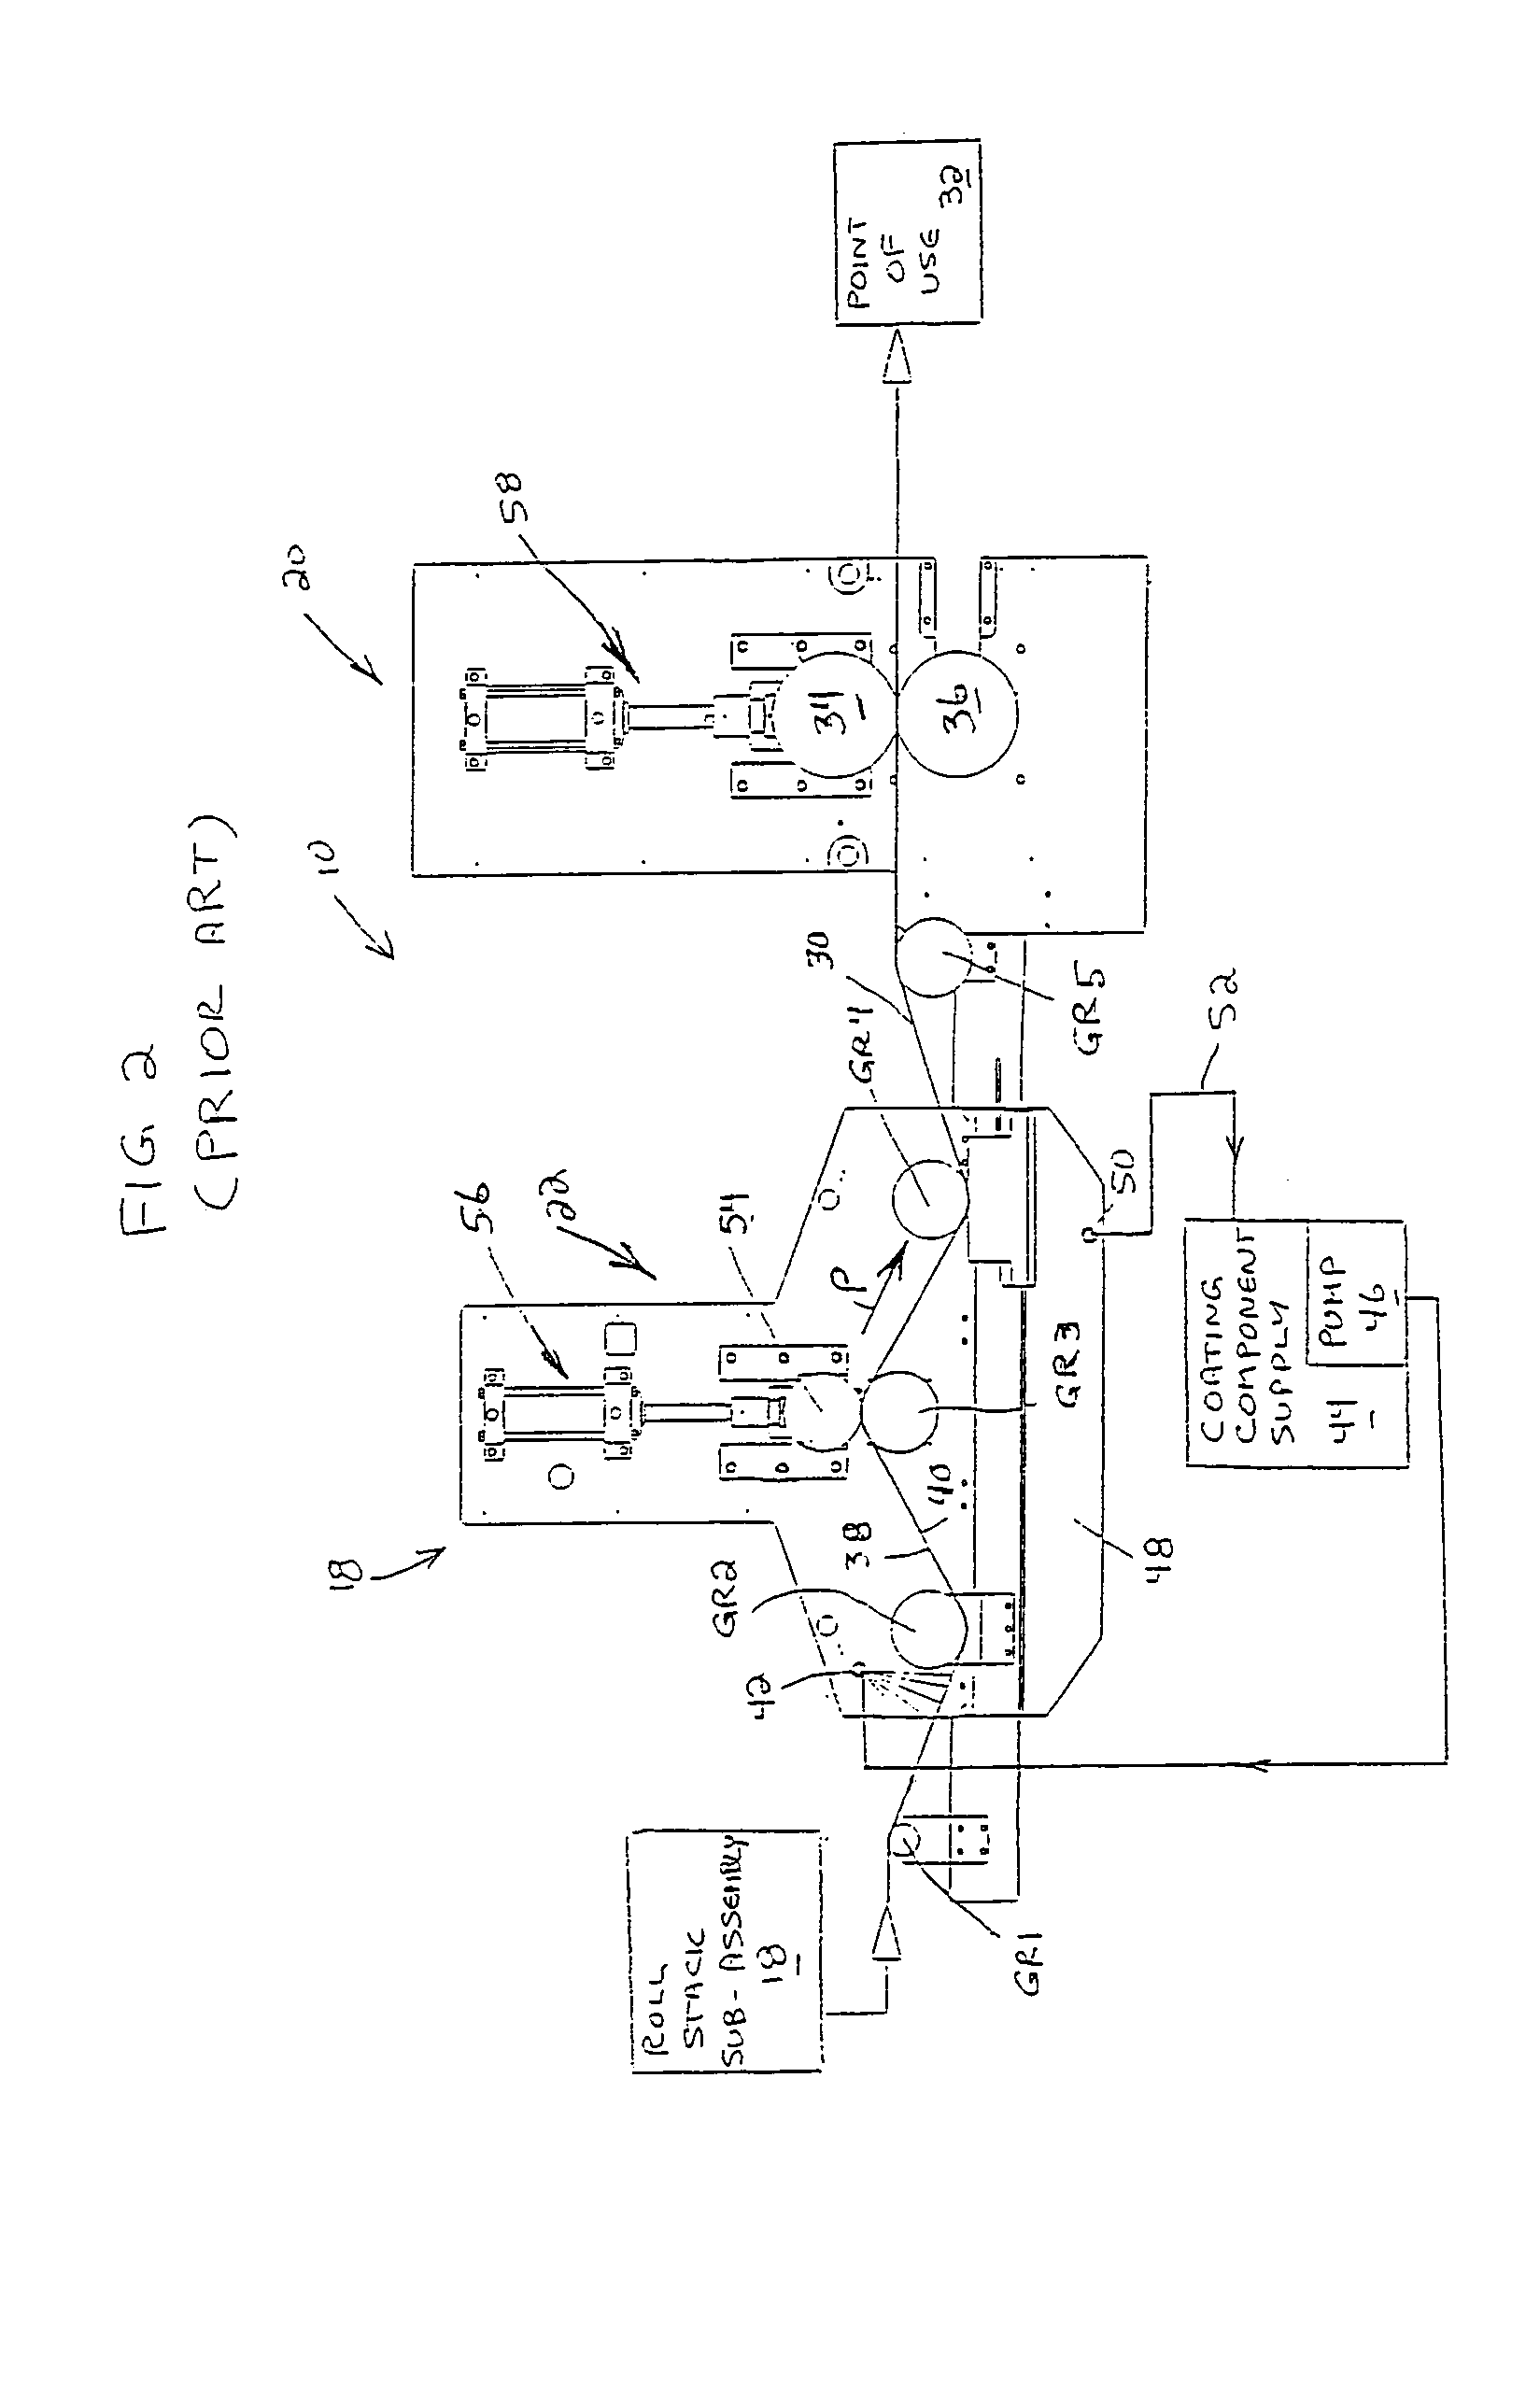 Sheet coating system on an apparatus for extrusion forming a sheet product